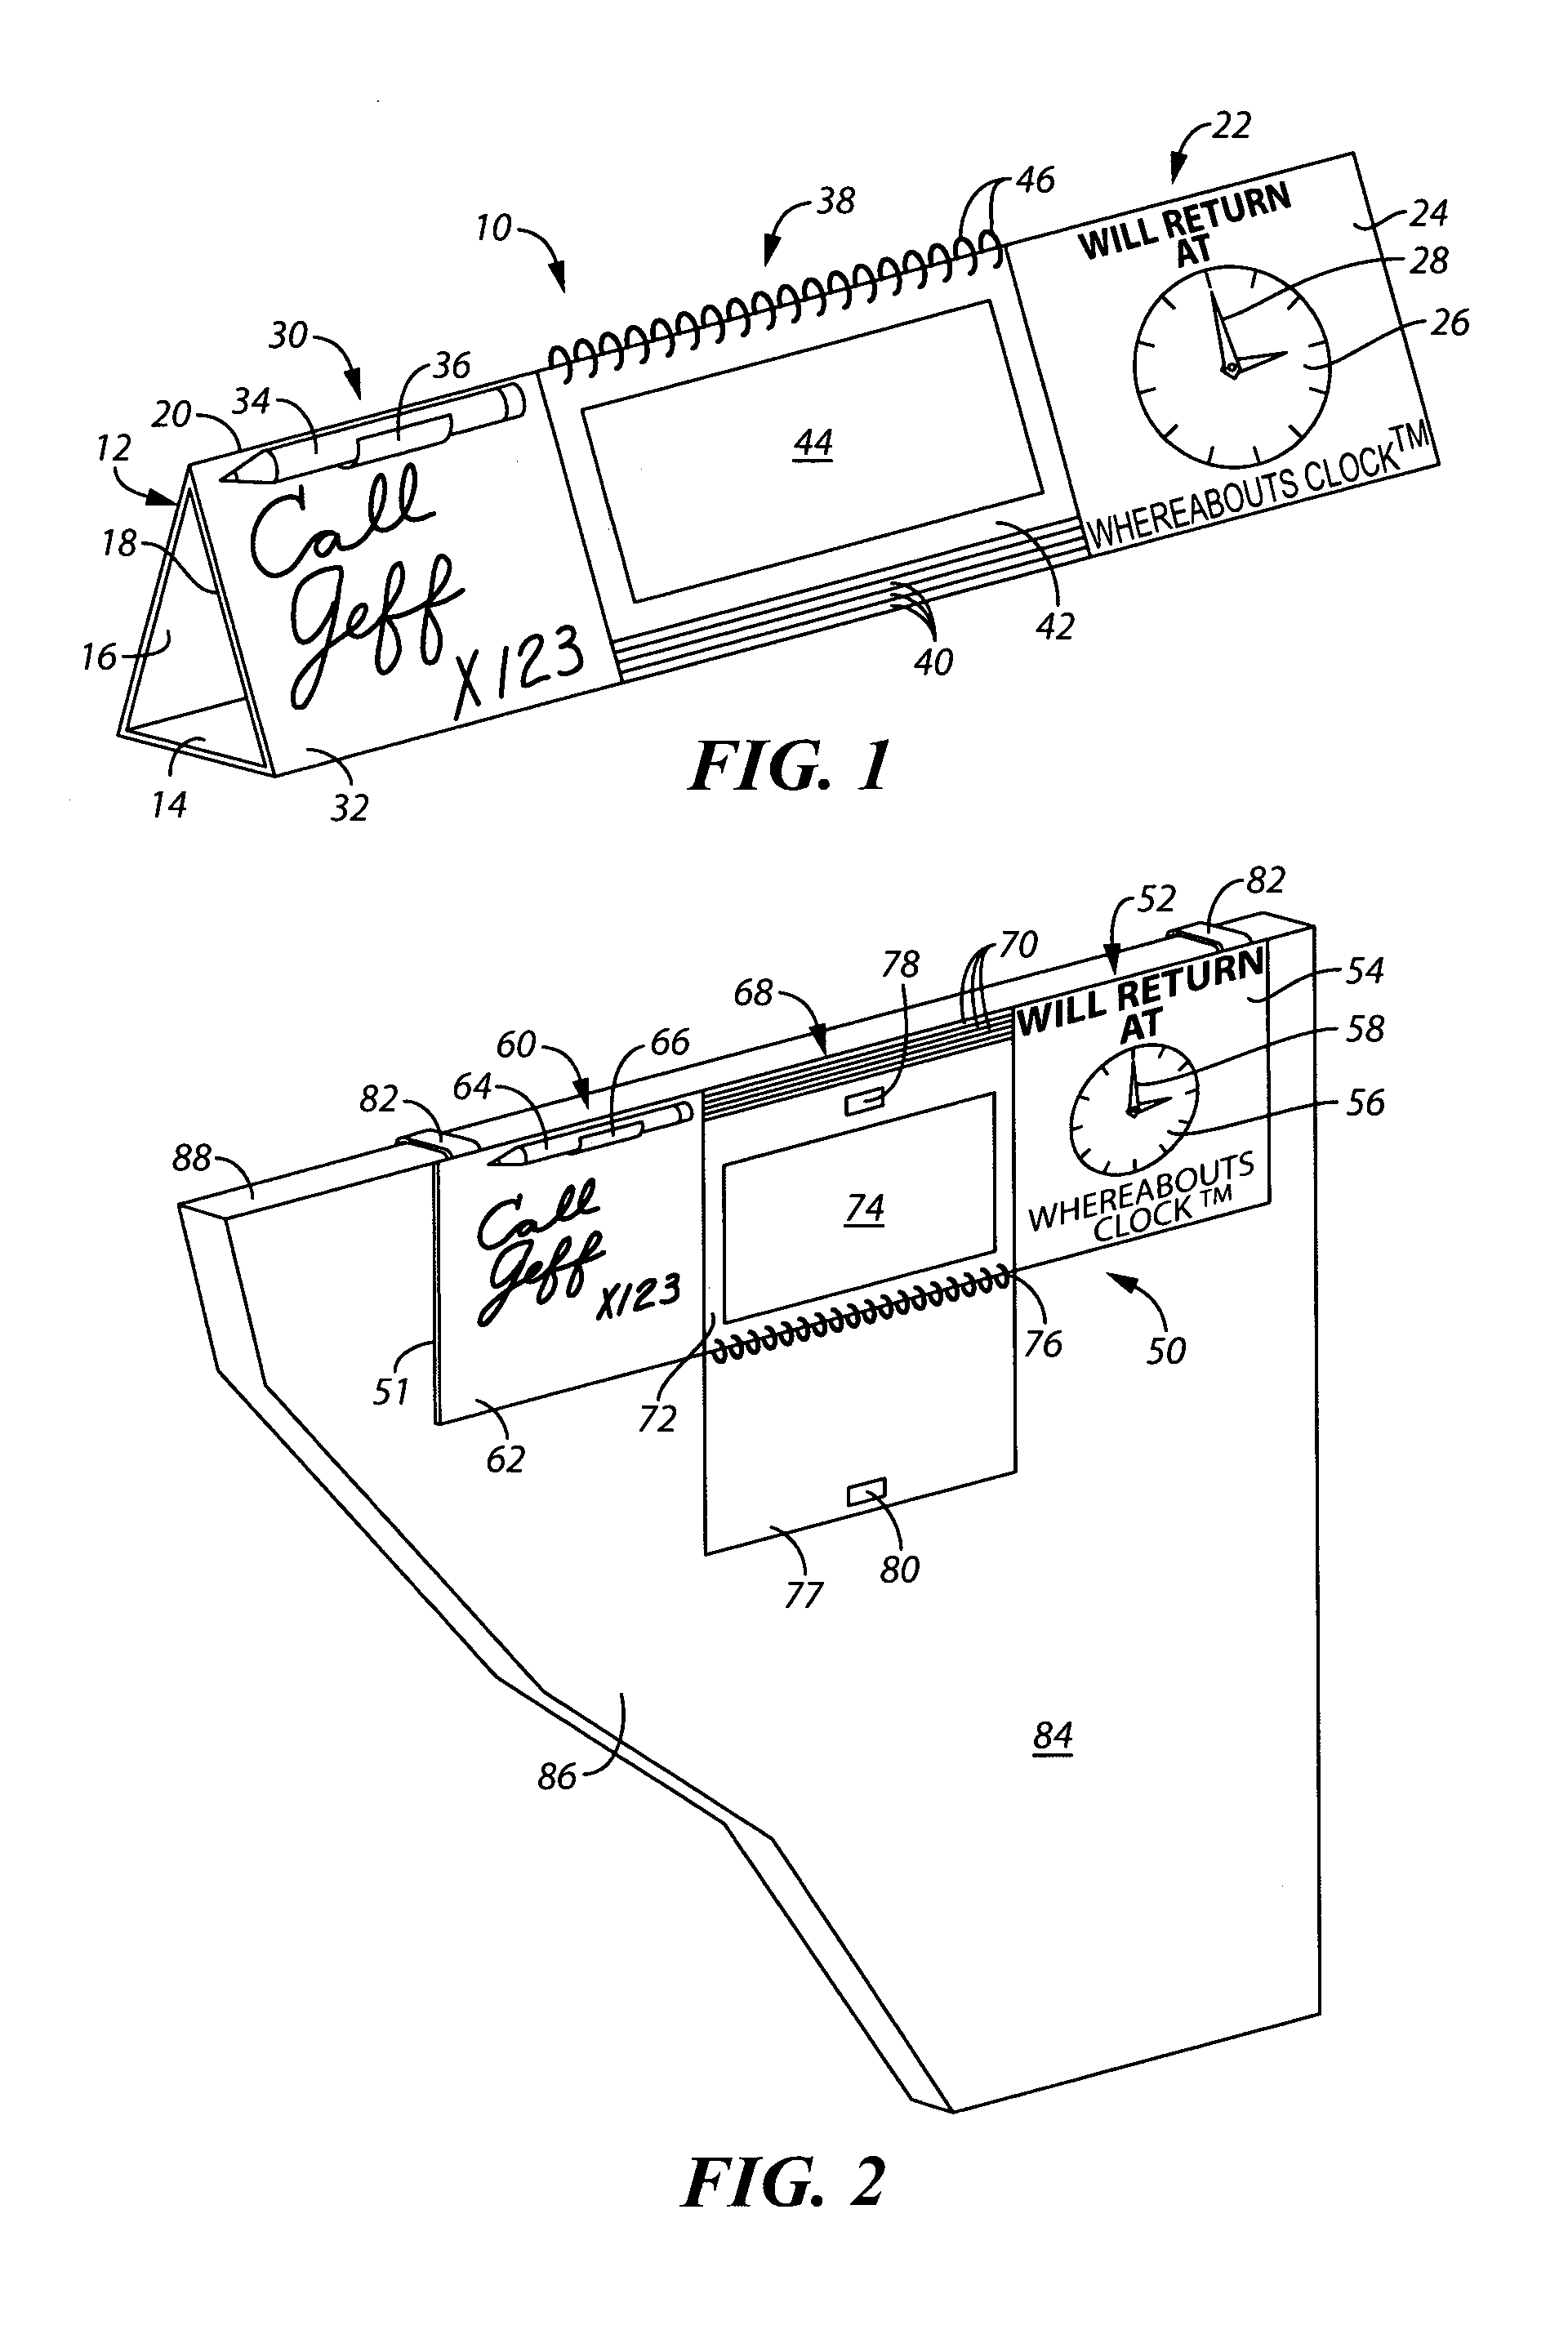 Display apparatus for visually communicating information pertaining to a worker's whereabouts